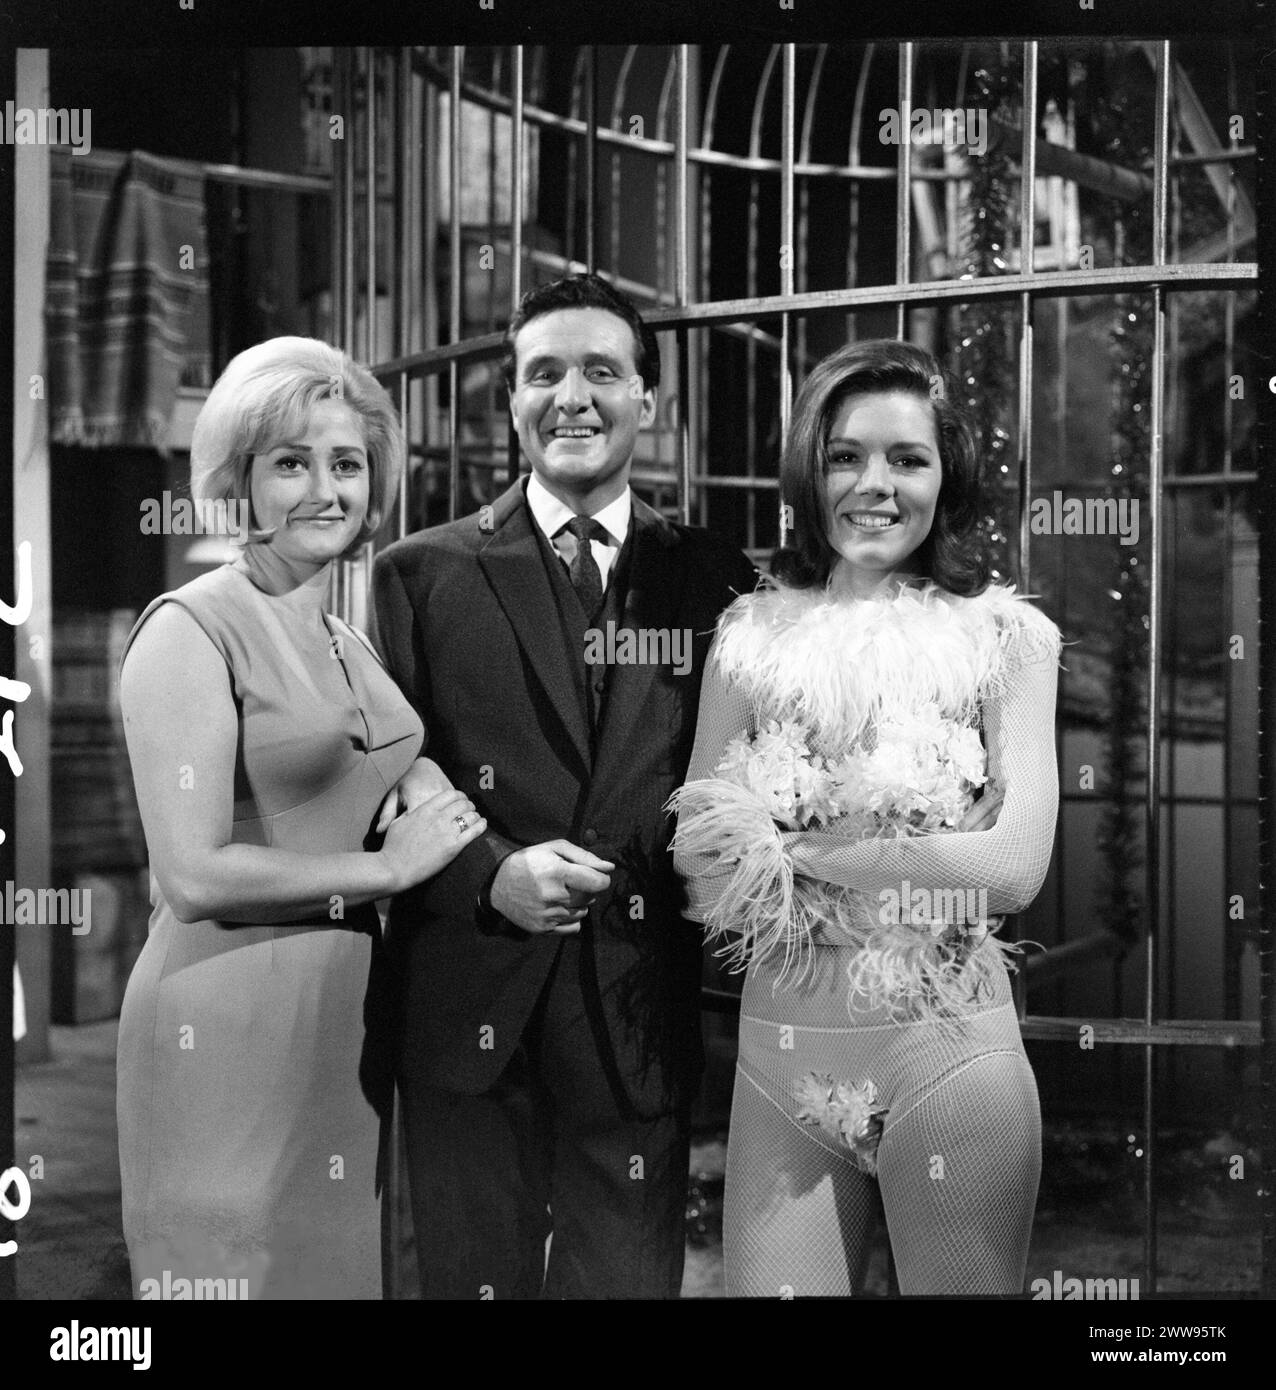 PATRICK MACNEE as John Steed and DIANA RIGG as Emma Peel with British actress LIZ FRASER on the set of THE GIRL FROM AUNTIE episode  17  of the fourth series of THE AVENGERS TV Series first broadcast on January 18 1966 Director ROY WARD BAKER Written by ROGER MARSHALL Wardrobe JOHN BATES and JACKIE JACKSON Music LAURIE JOHNSON Associated British Productions for ABC Television Stock Photo